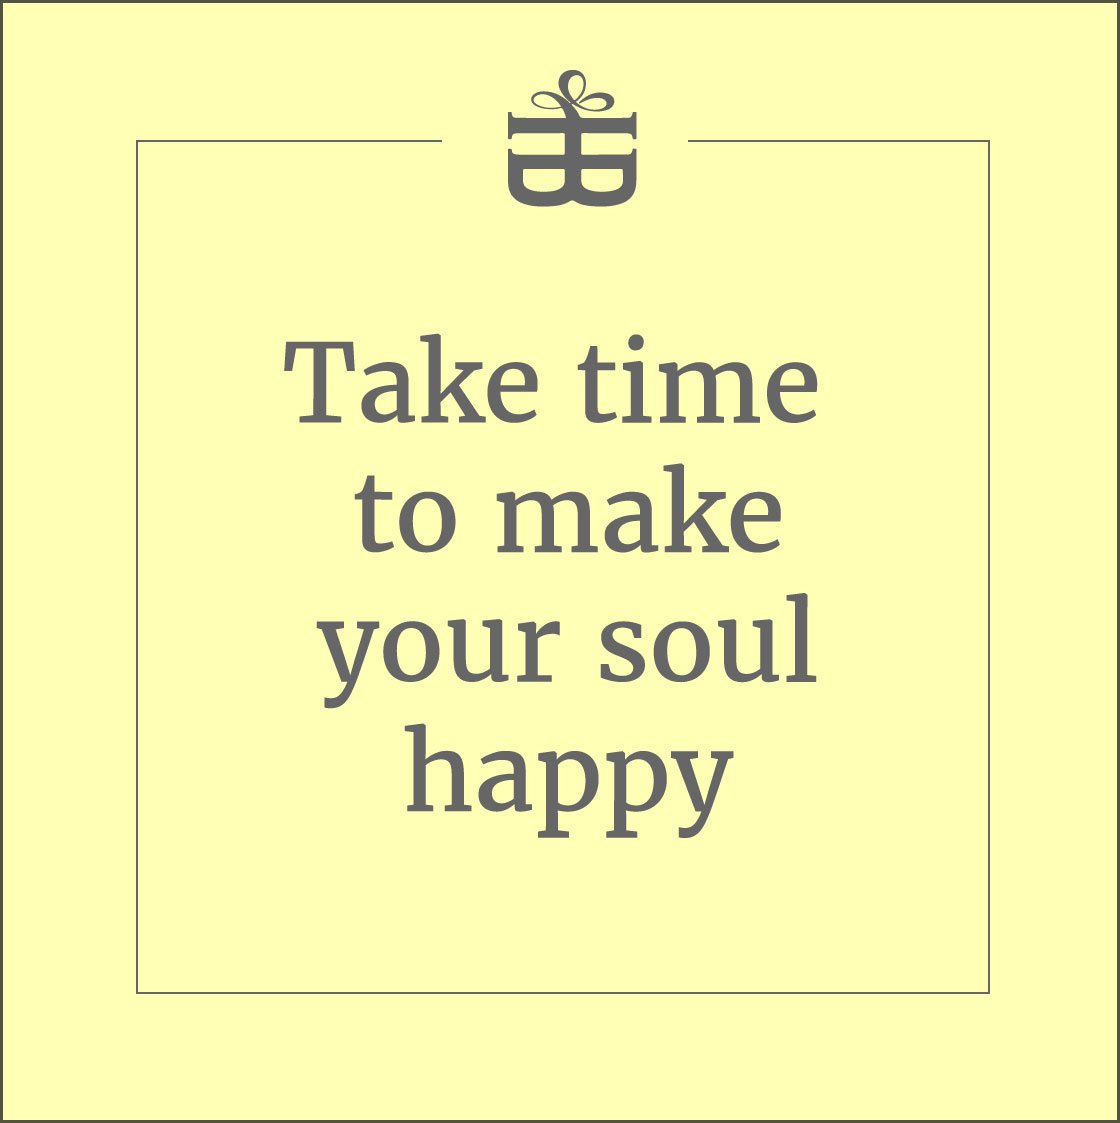 Happy Box London On Twitter: "An Inspirational Quote For This Fine Bank Holiday Monday... #Soulhappy #Happiness #Lovebankholiday #Bankholiday Https://T.co/Lpyqaidjwy" / Twitter